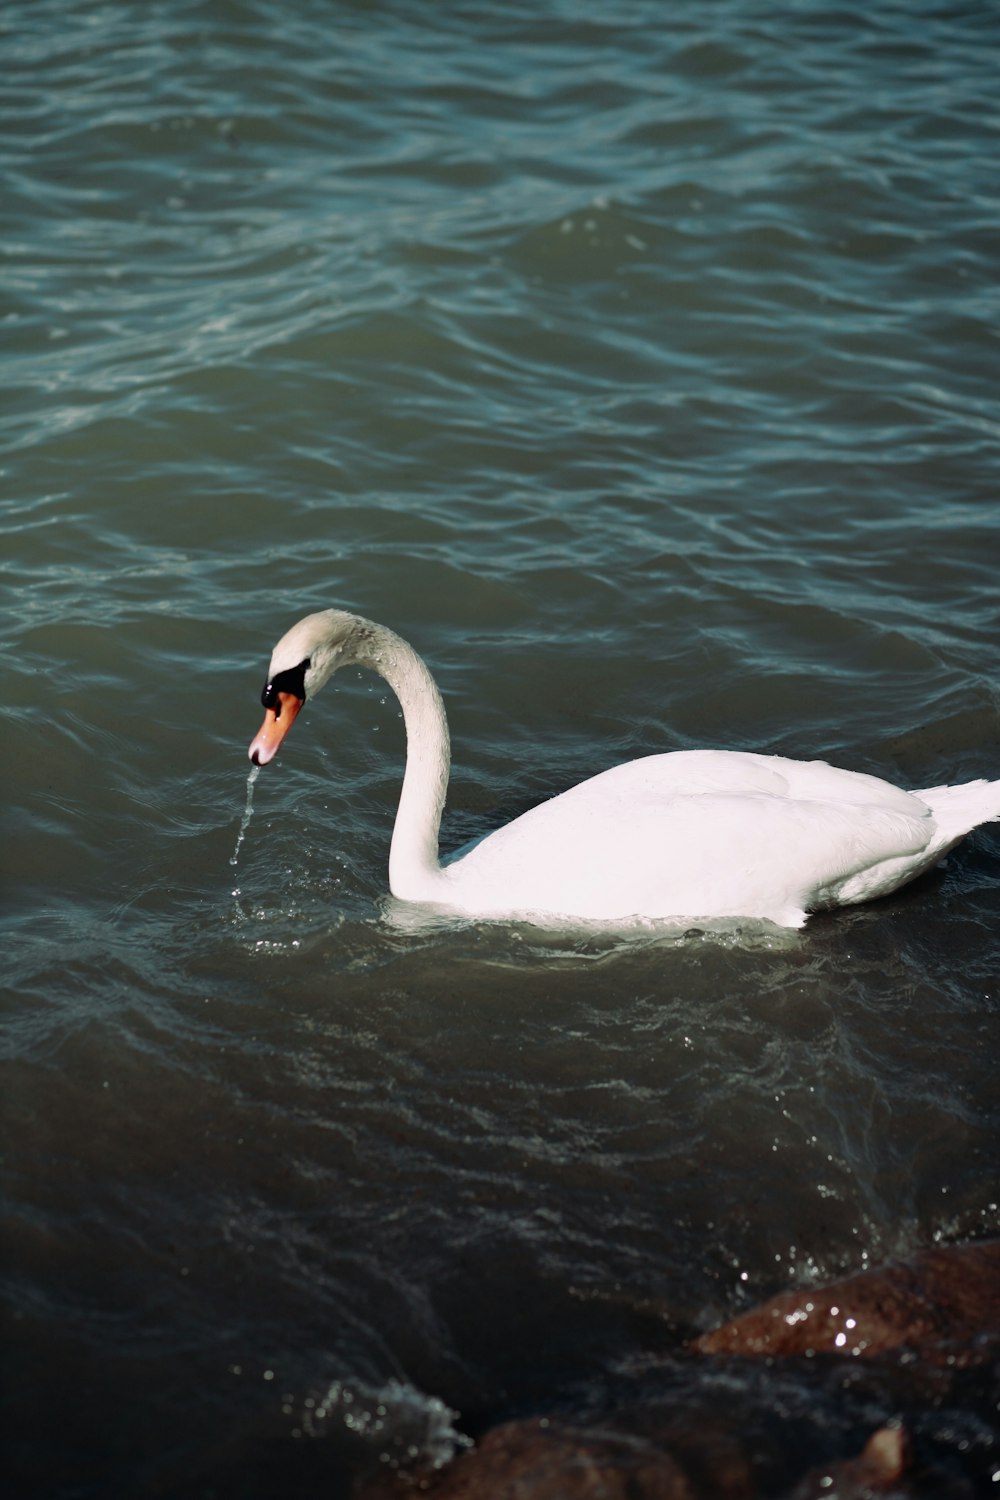 a white swan swimming in a body of water